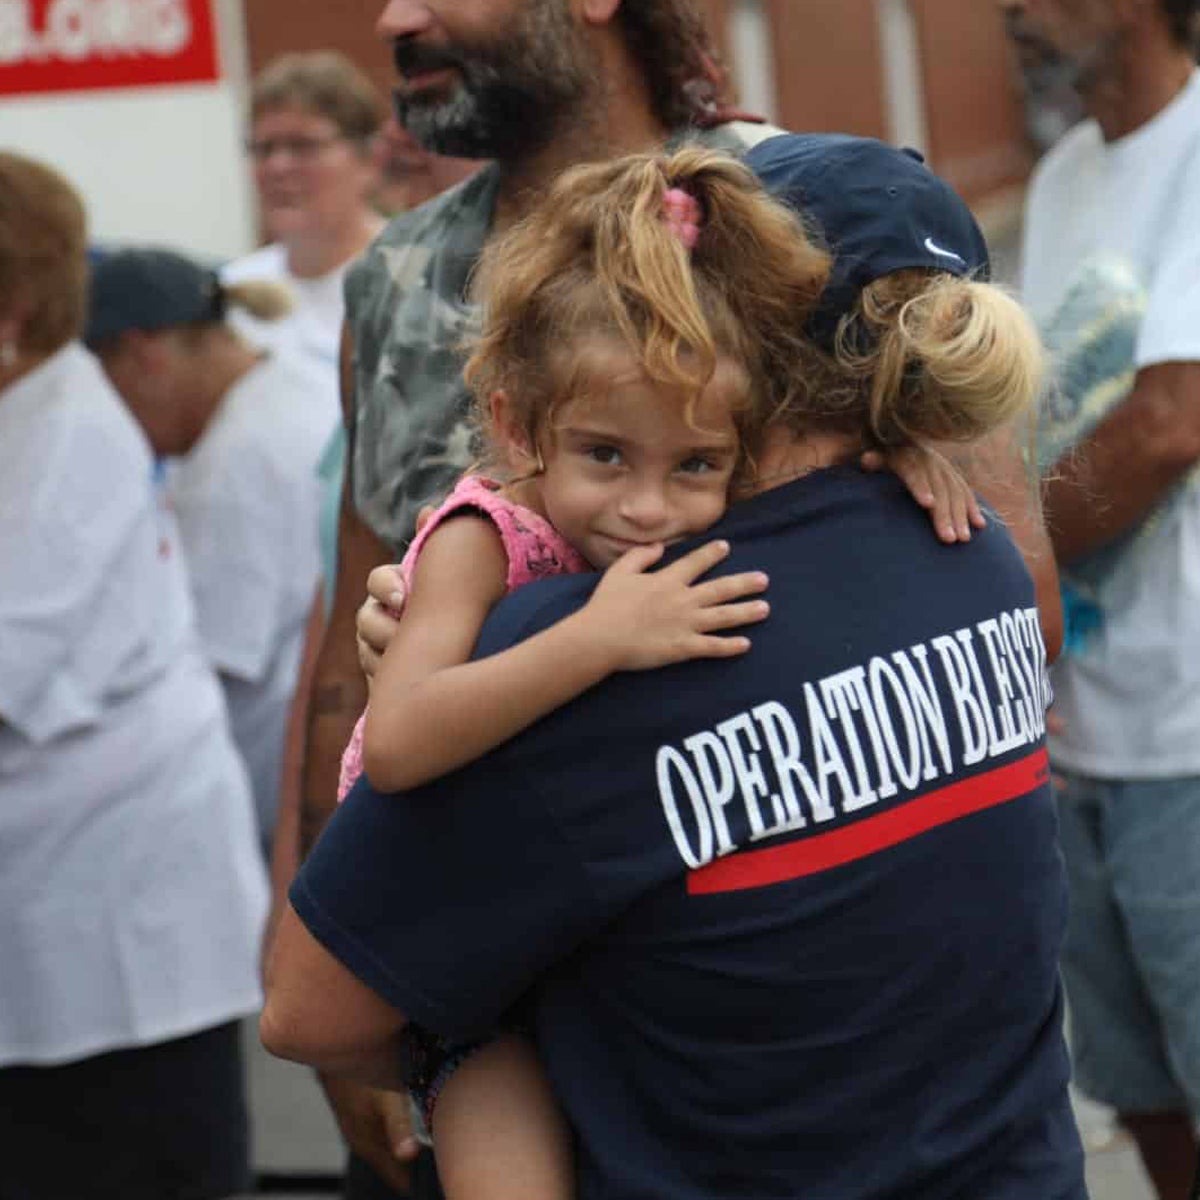 Offering a hug to hurricane victims after Florence in North Carolina.